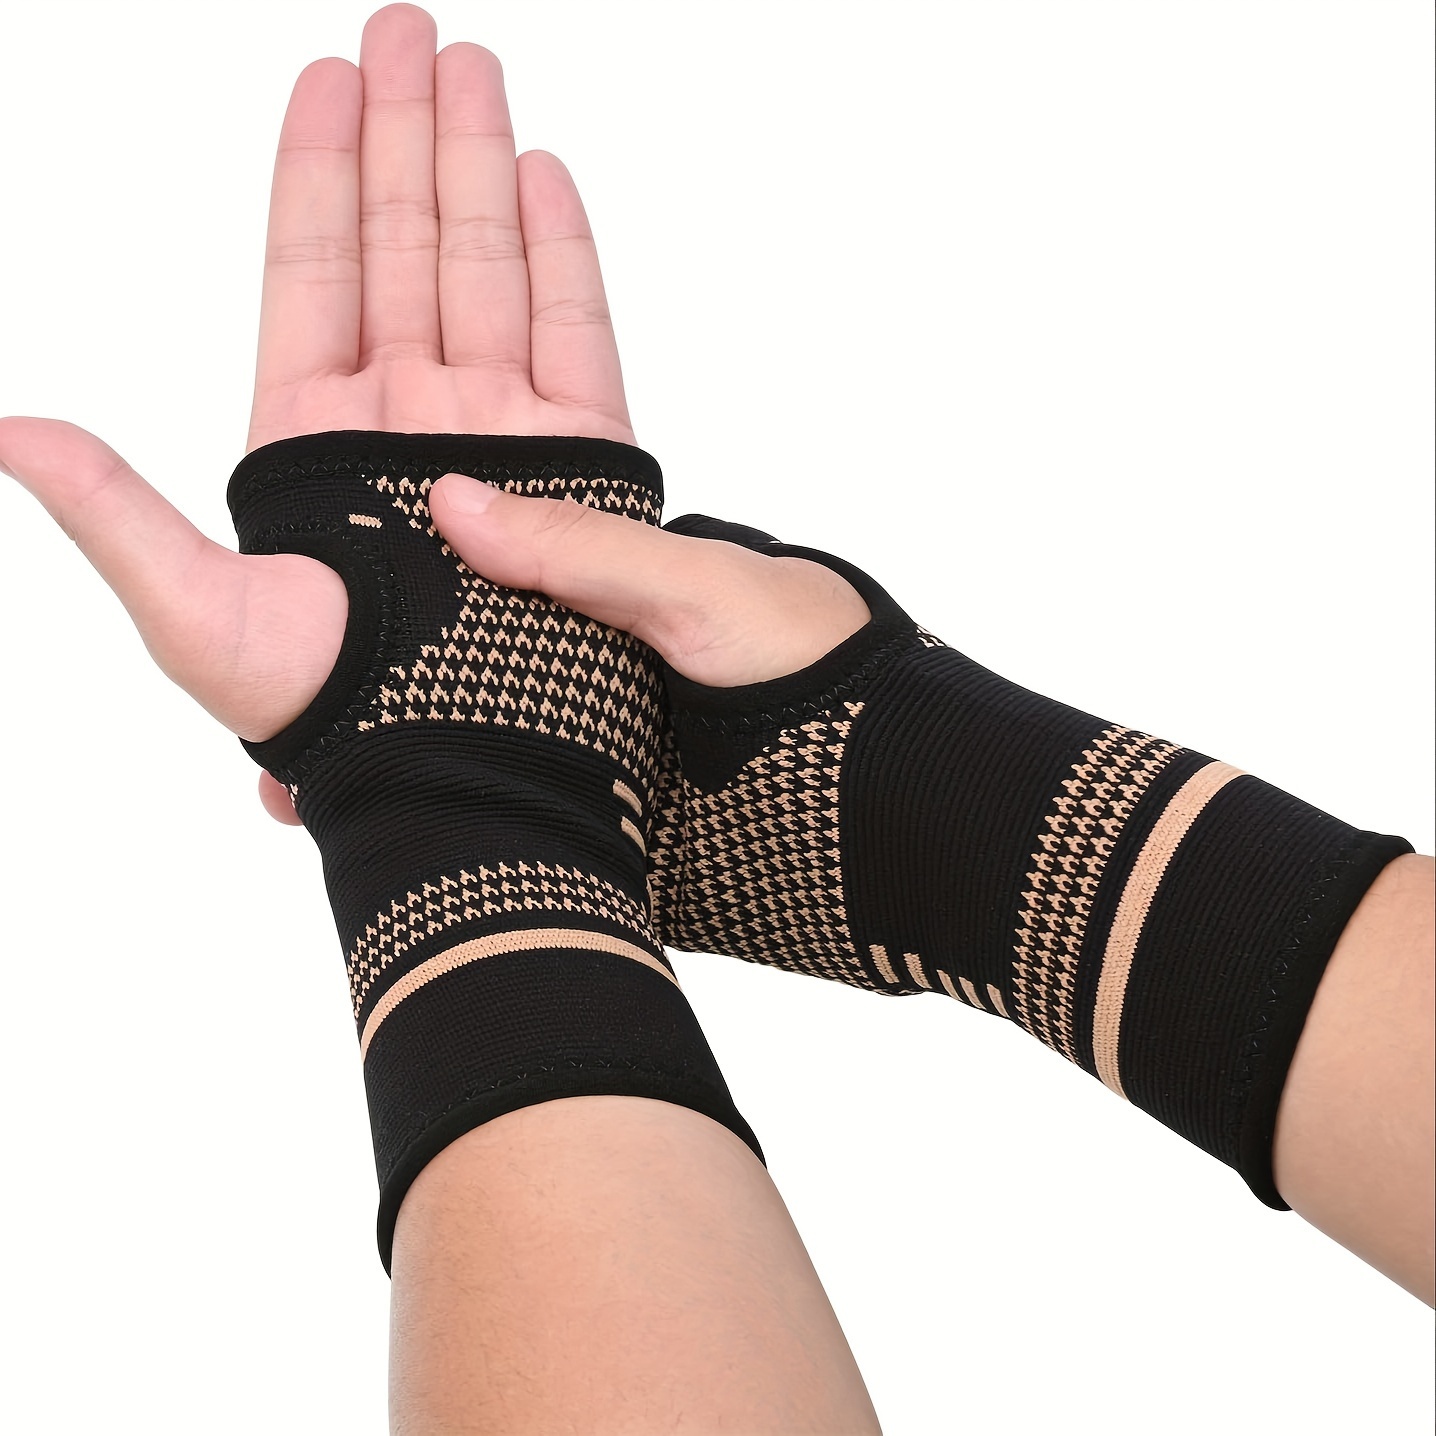 

1pc Copper Wrist Brace, Wrist Support Compression Sleeve, Comfortable And Breathable, Elastic Wrist Guard For Men And Women, For Sports, Fitness, Workout